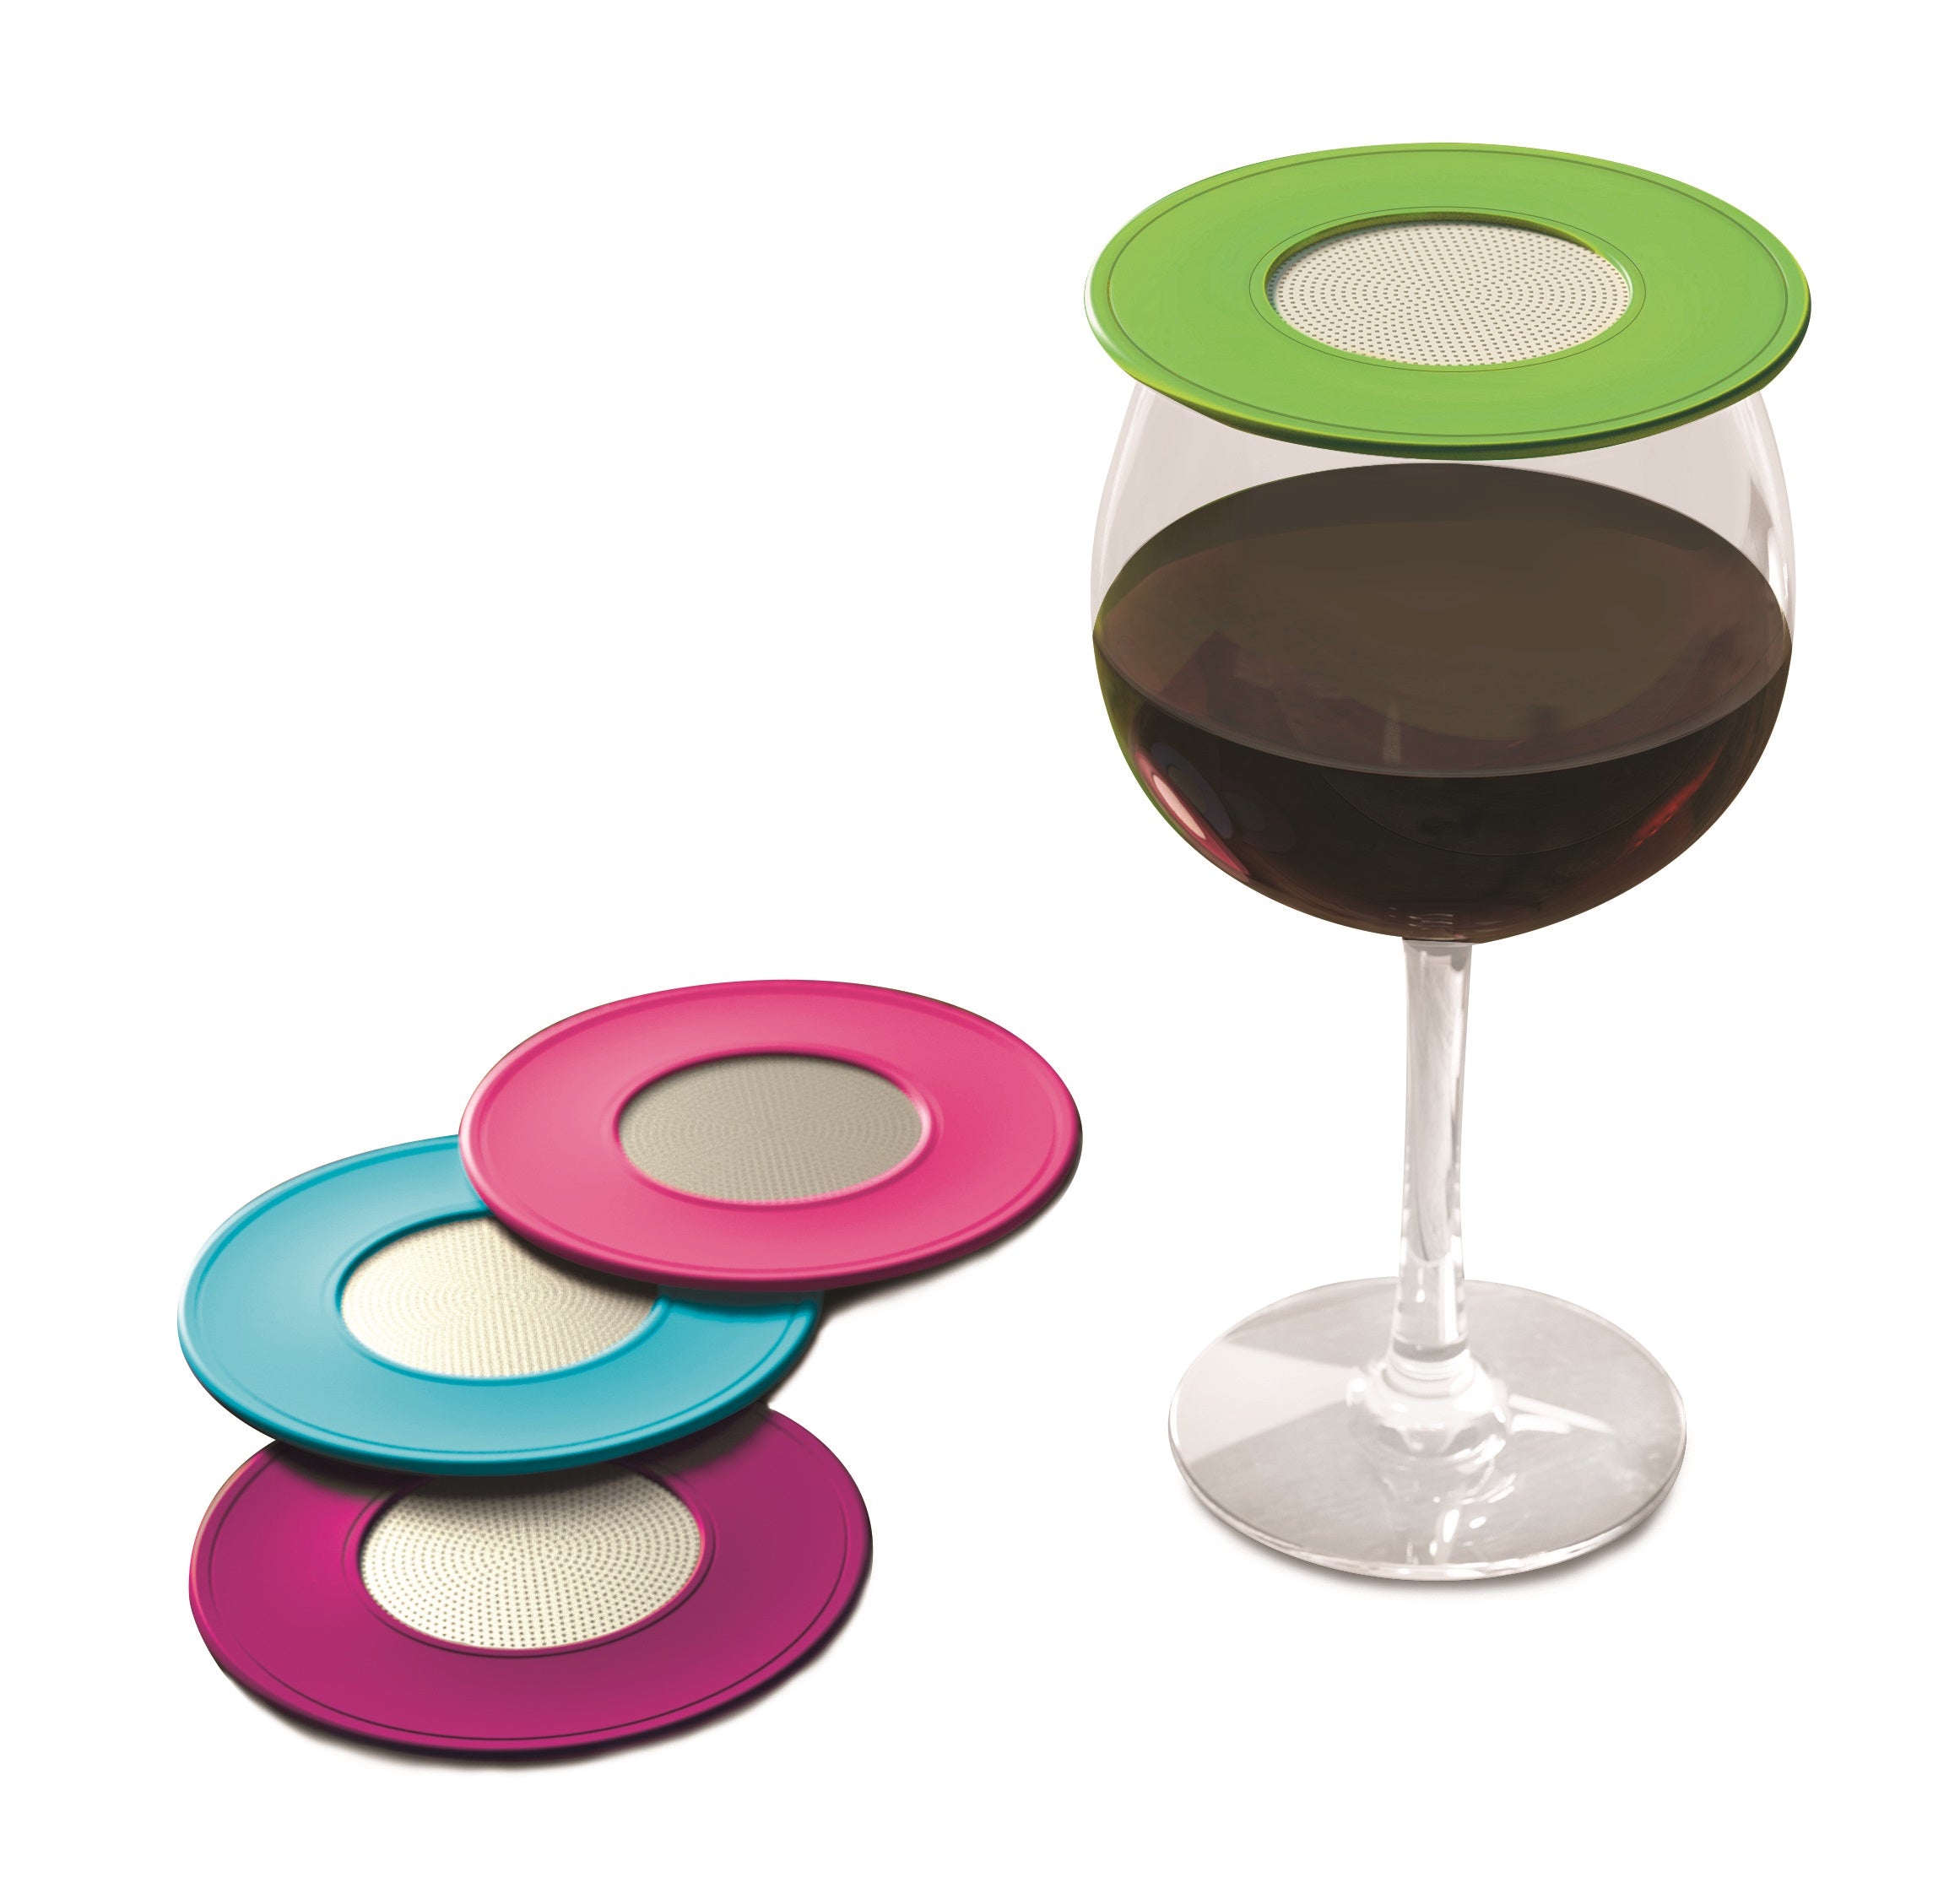 Ventilated Wine Glass Cover